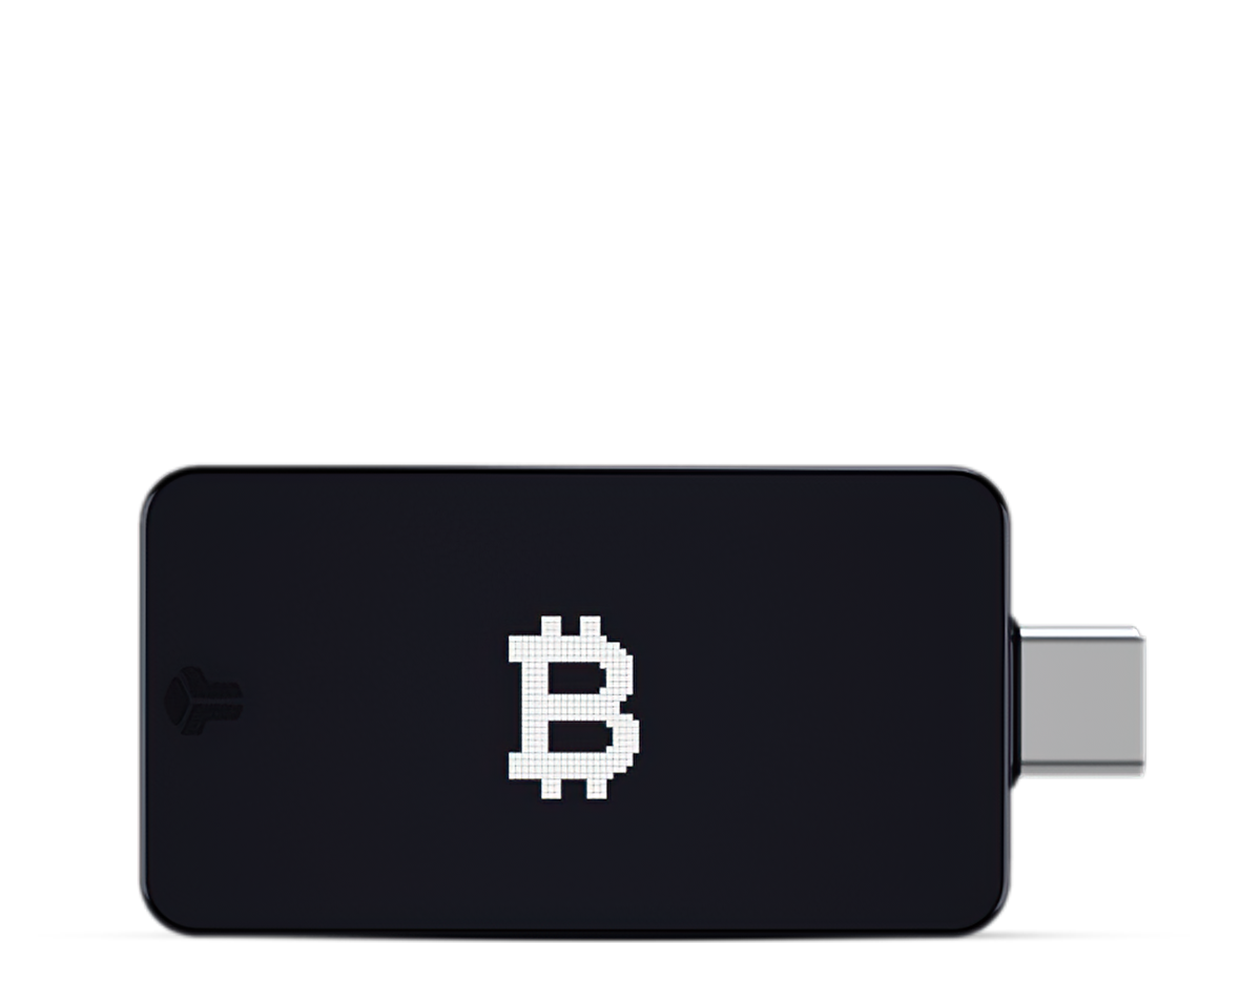 BitBox02 Hardware Wallet (Bitcoin Only Edition) by Shift Crypto